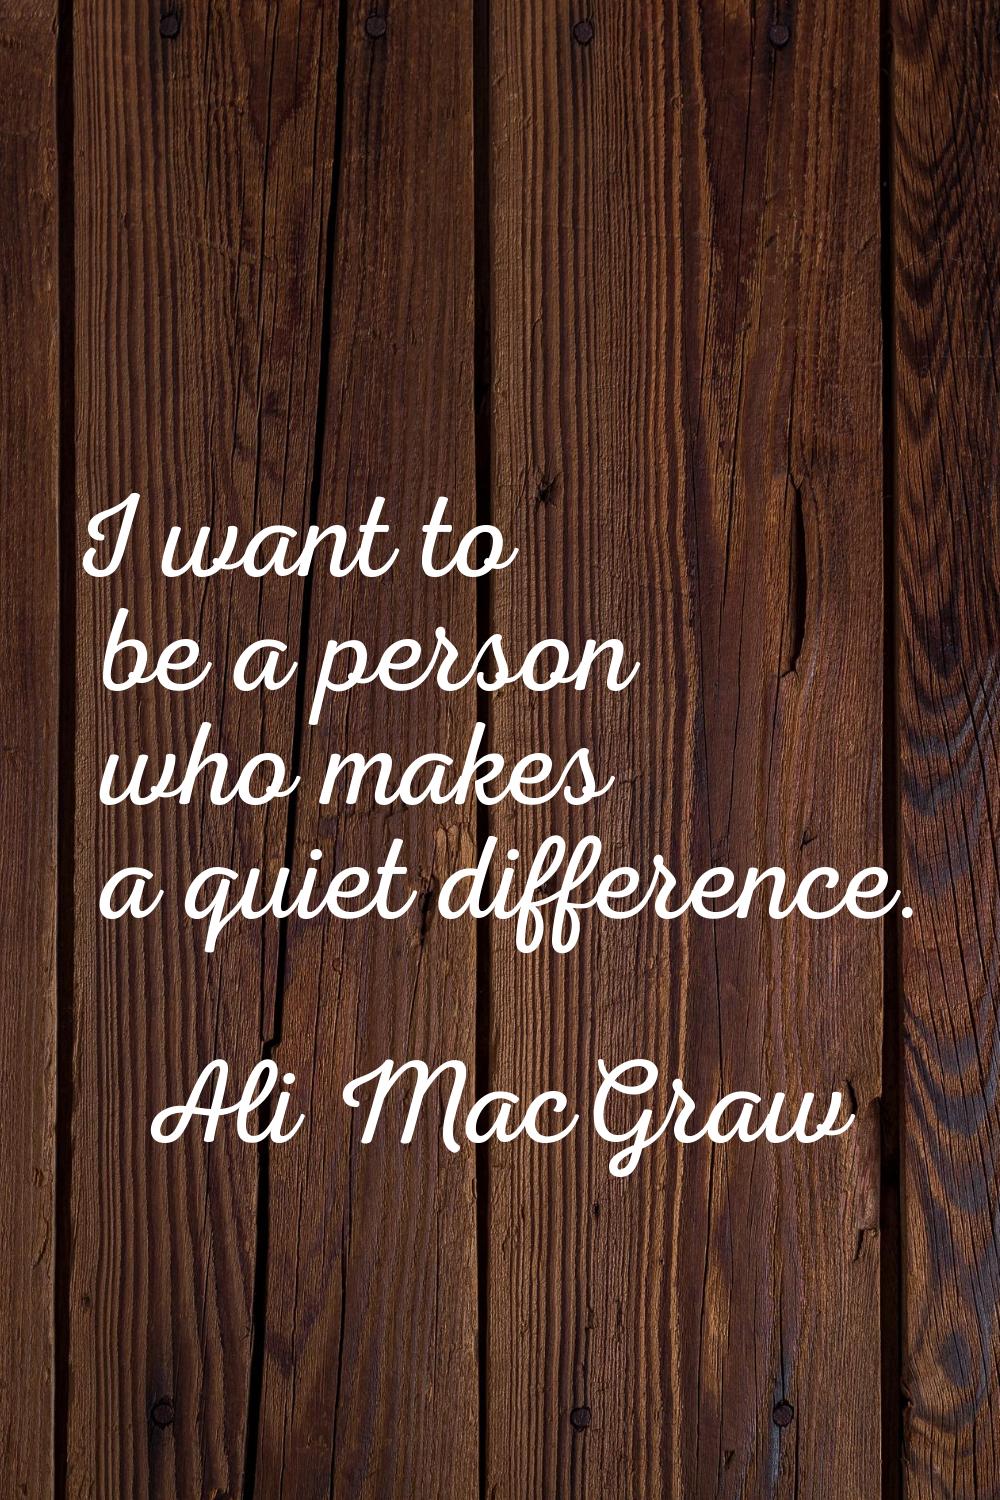 I want to be a person who makes a quiet difference.